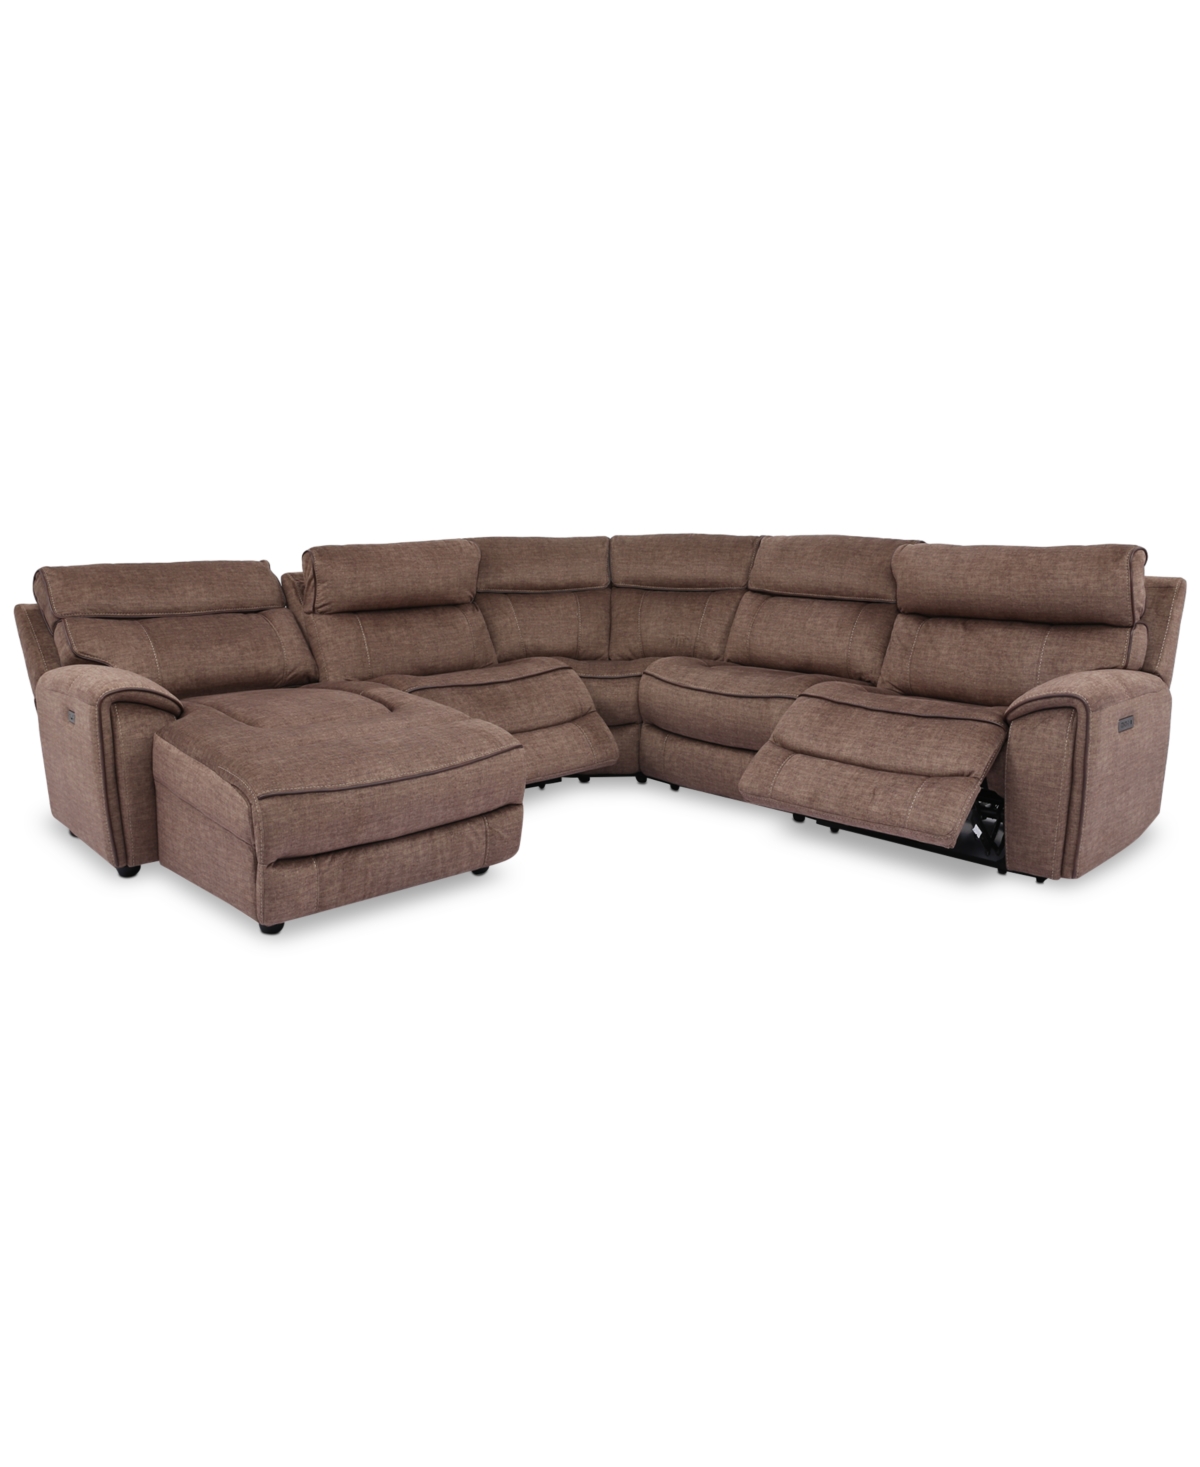 Furniture Hutchenson 5-pc. Fabric Chaise Sectional With 2 Power Recliners In Chocolate Brown